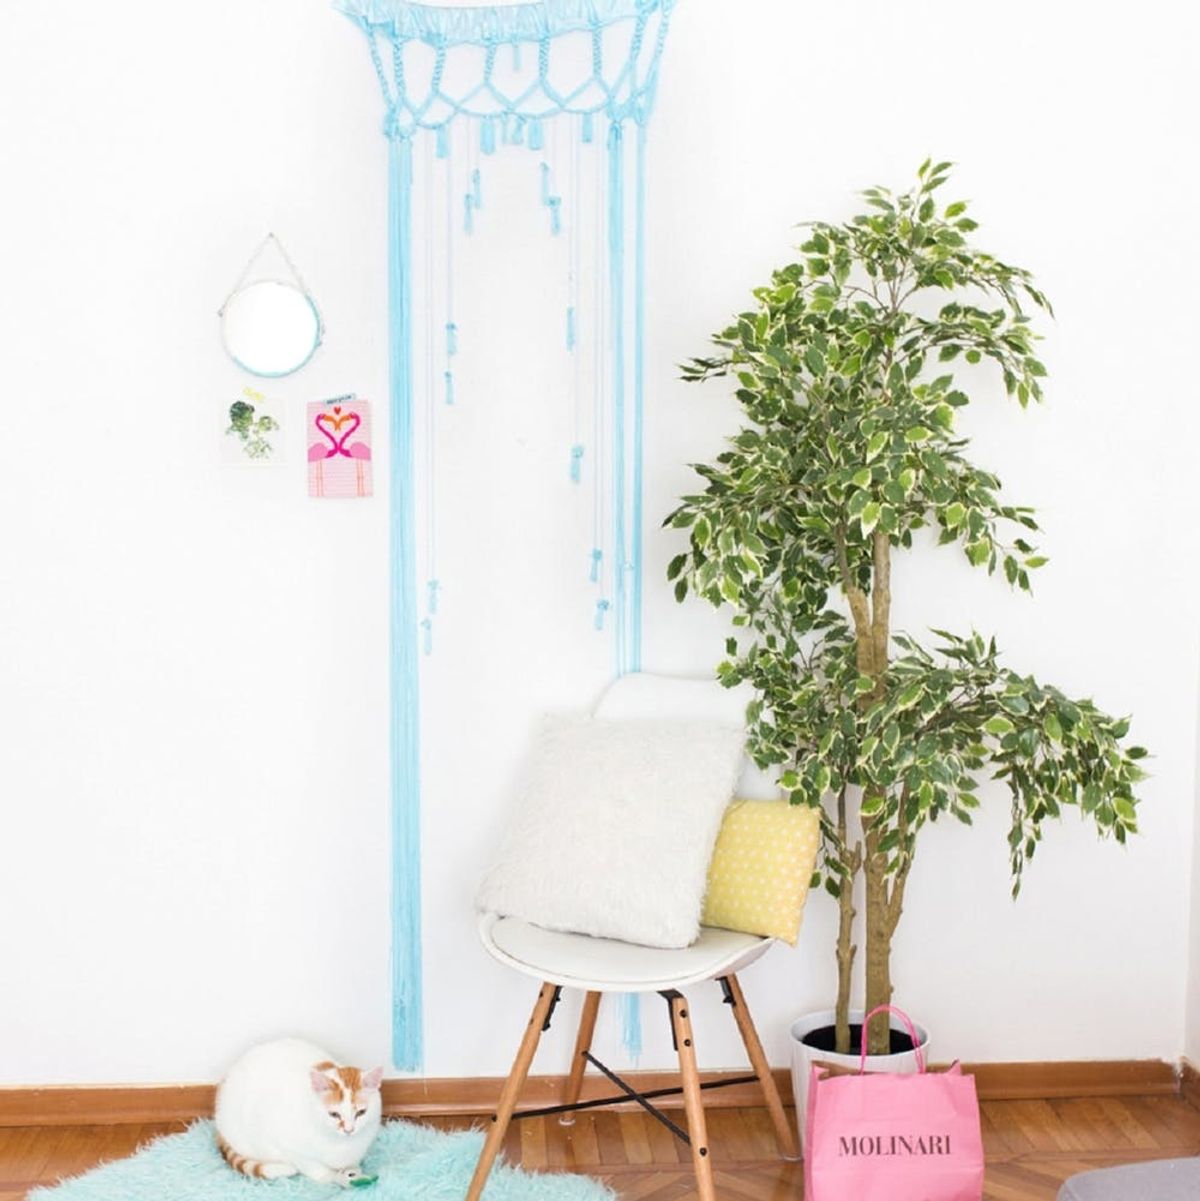 This Urban Outfitters-Inspired Boho Macrame Portal Is Surprisingly Cheap and Easy to Make